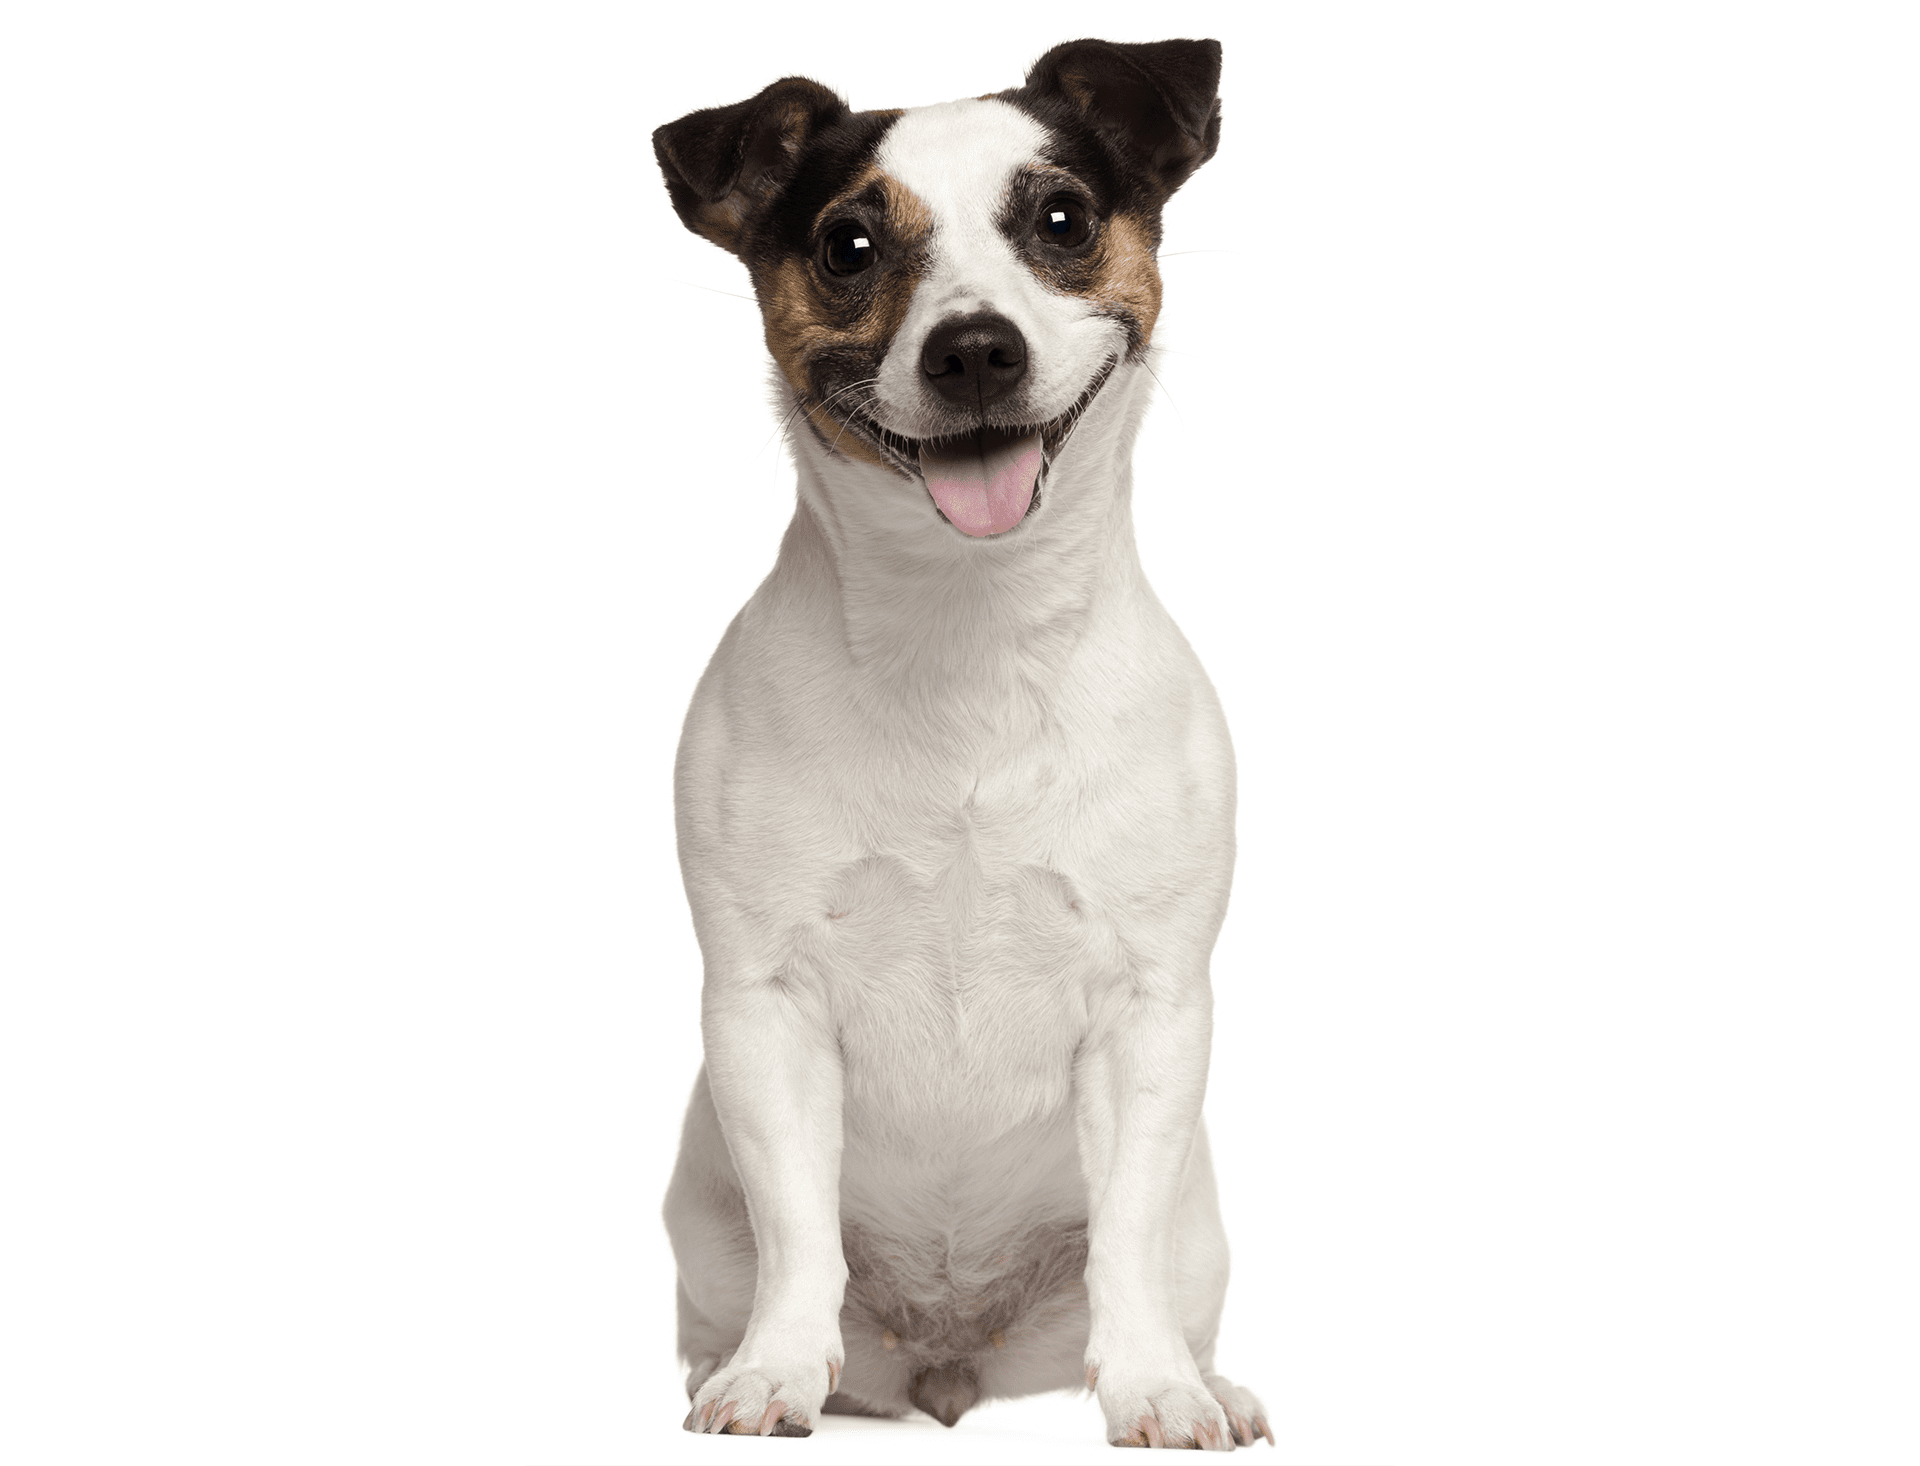 Jack Russell Terrier, three years old sitting on white background